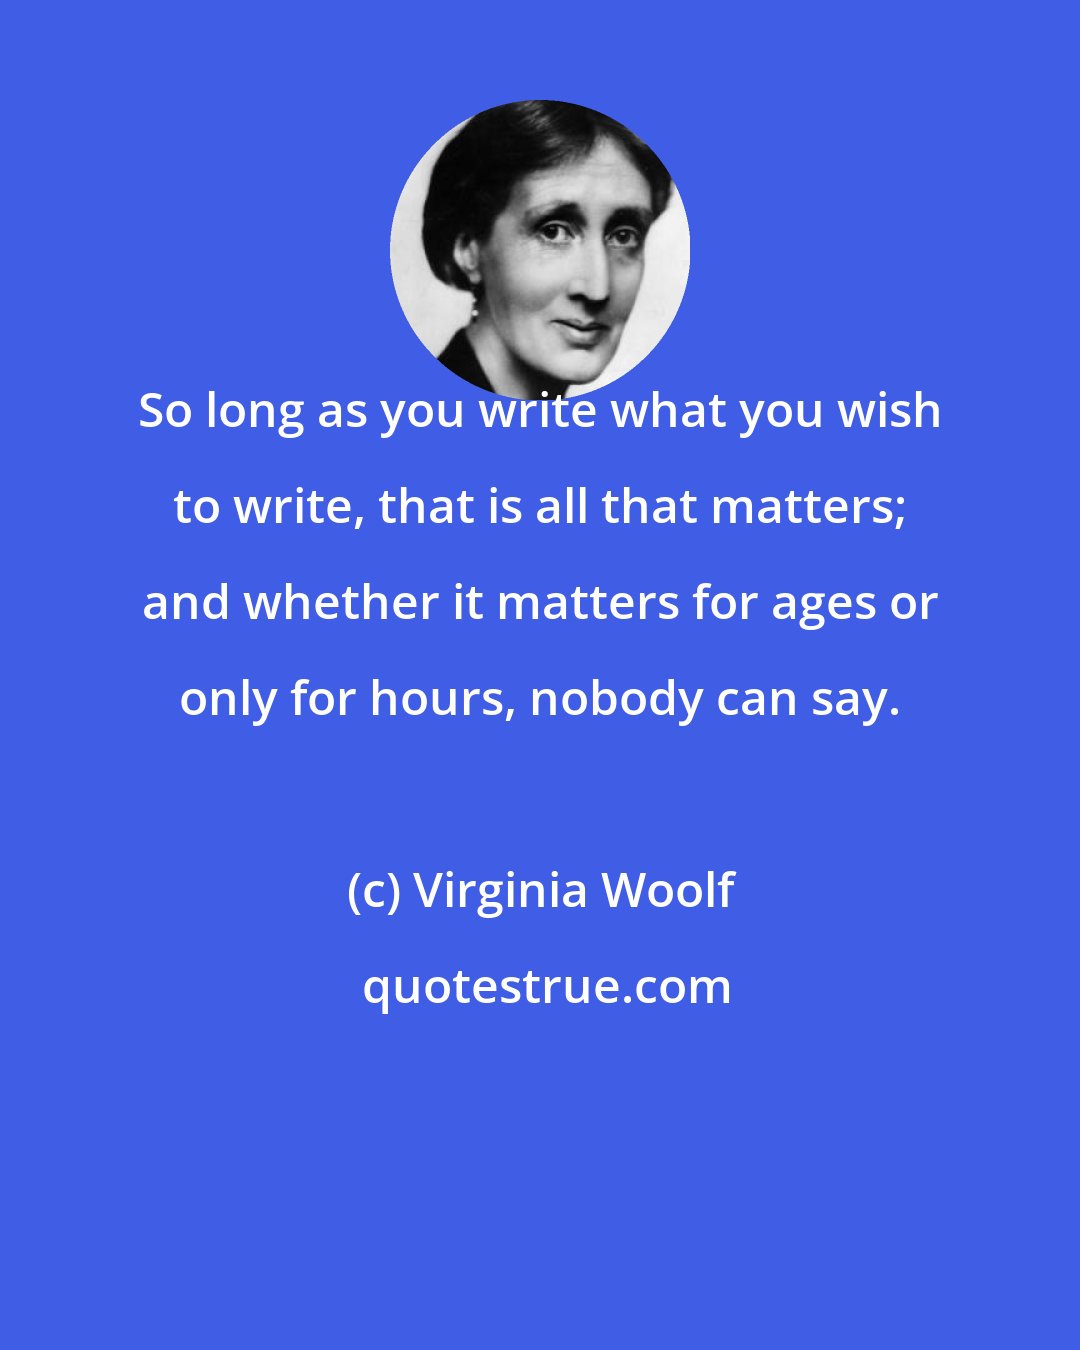 Virginia Woolf: So long as you write what you wish to write, that is all that matters; and whether it matters for ages or only for hours, nobody can say.